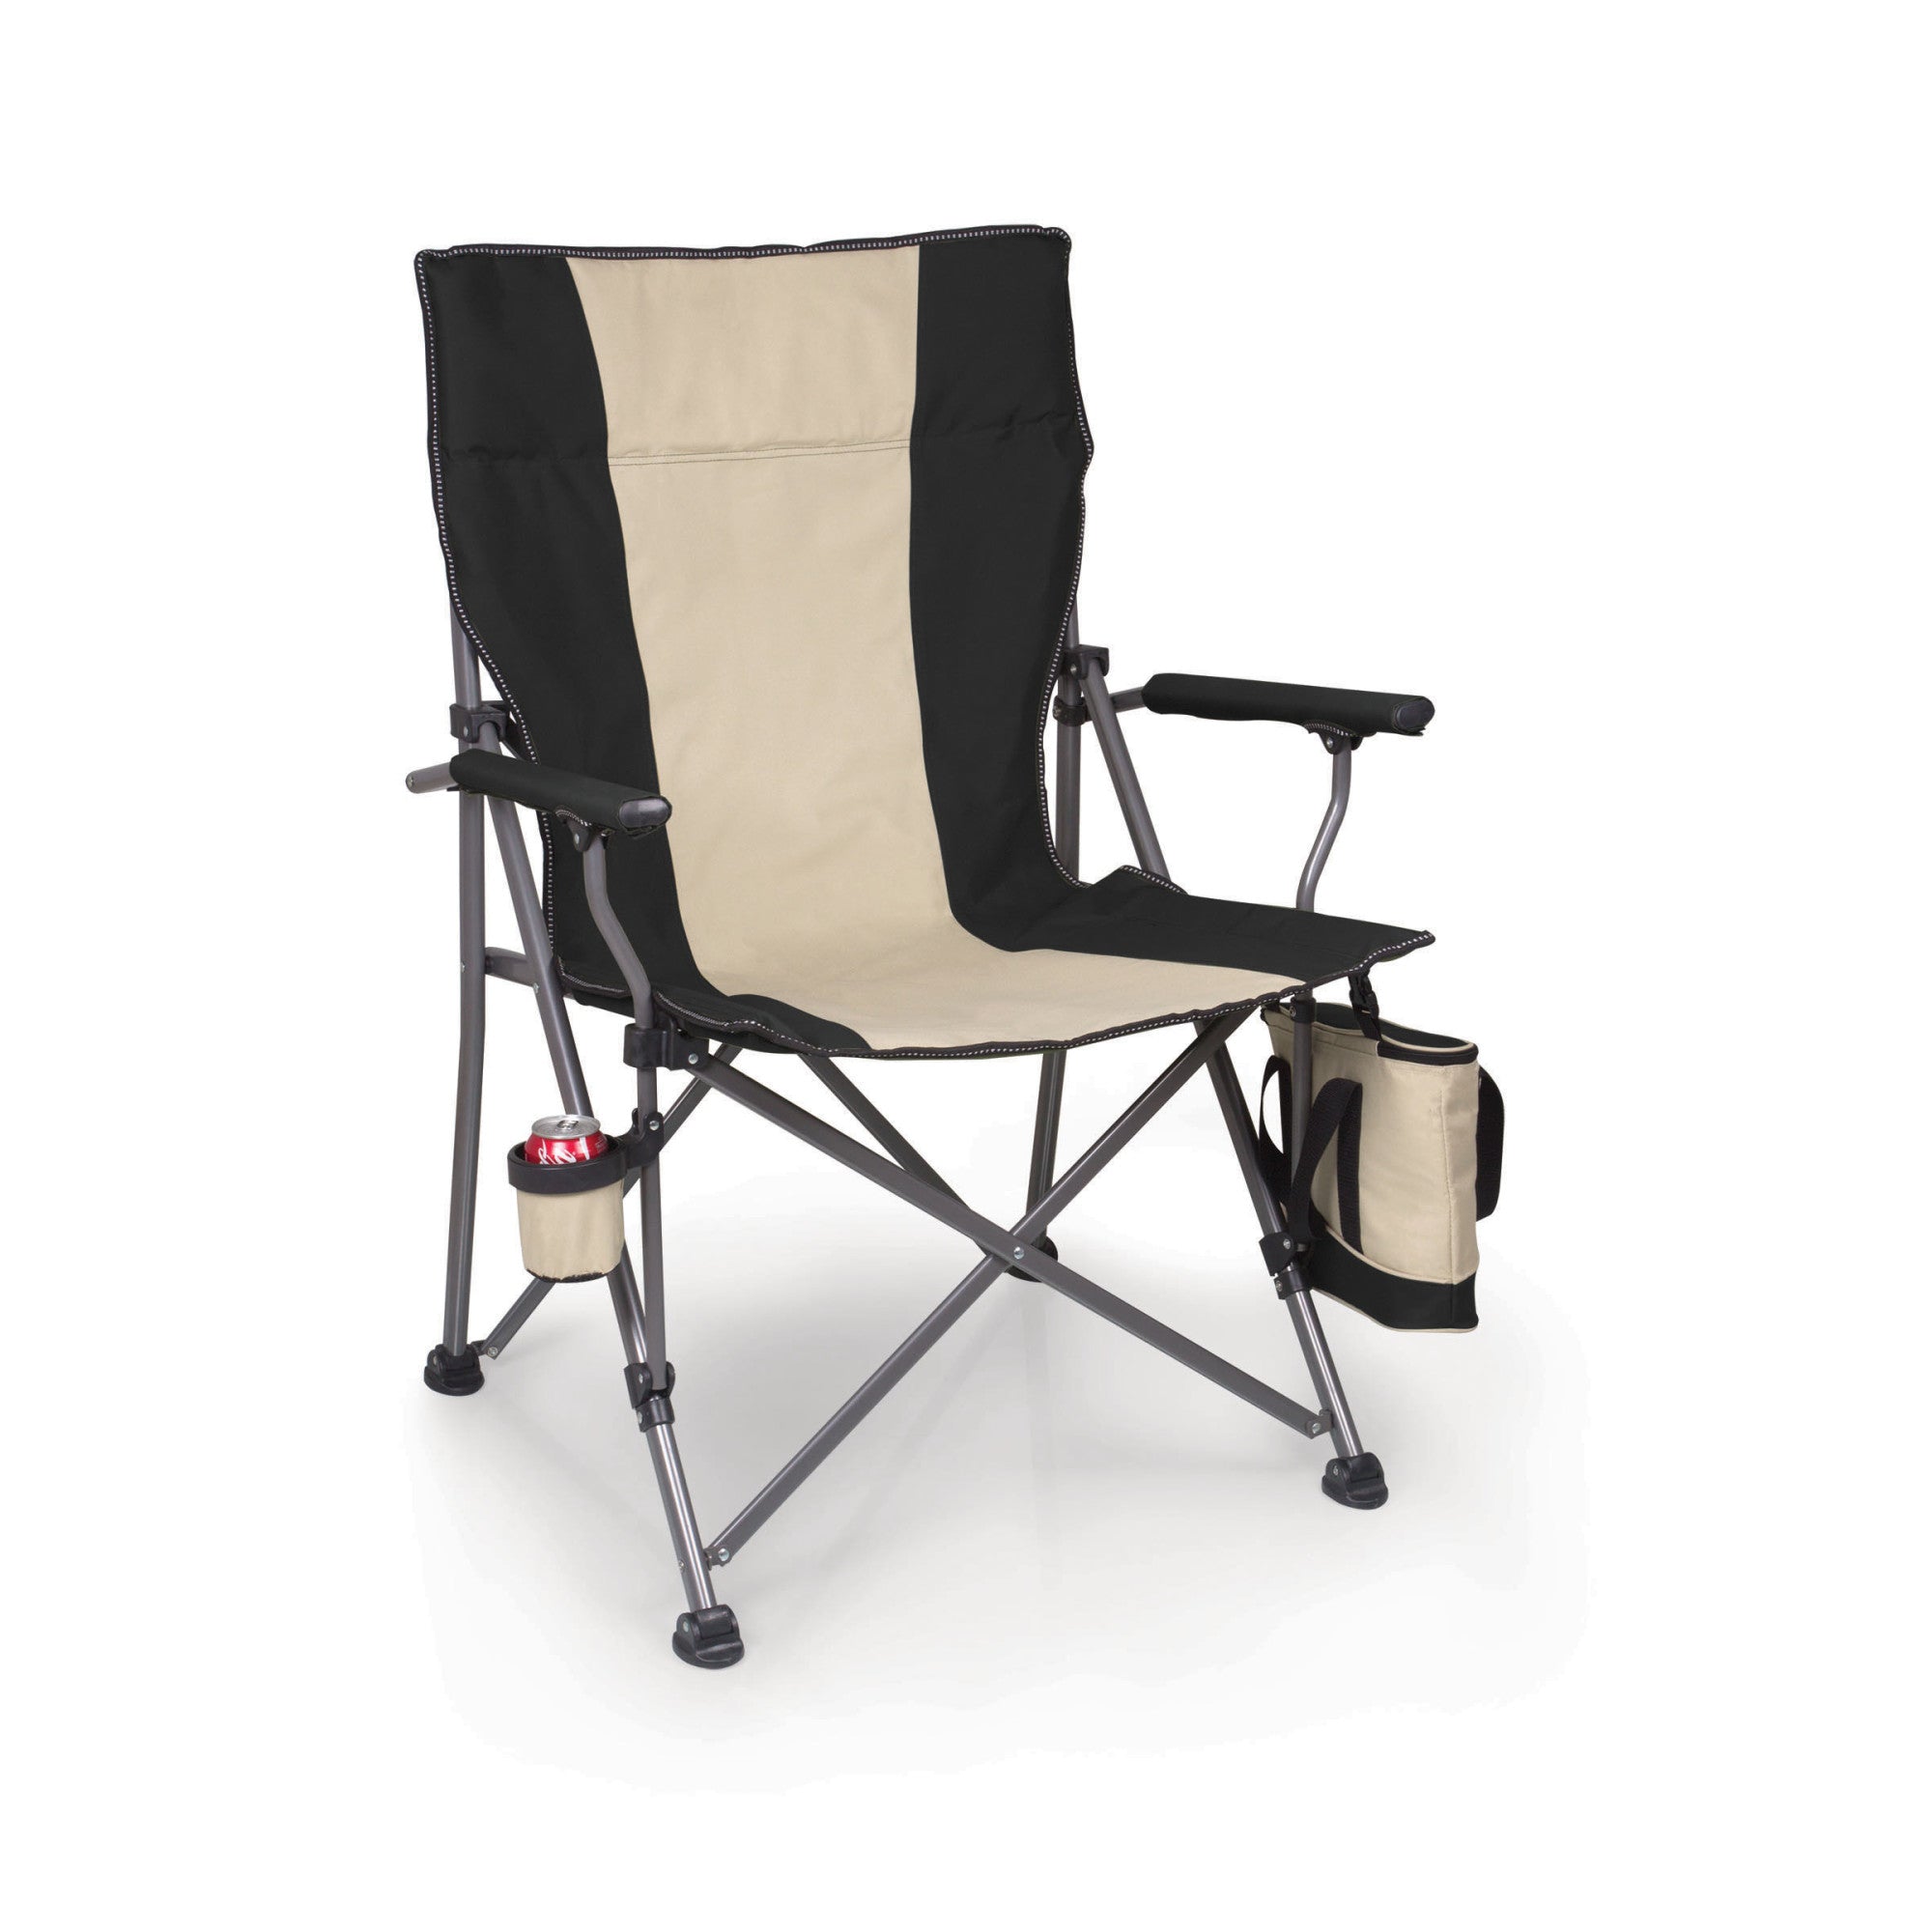 Detroit Lions - Big Bear XXL Camping Chair with Cooler